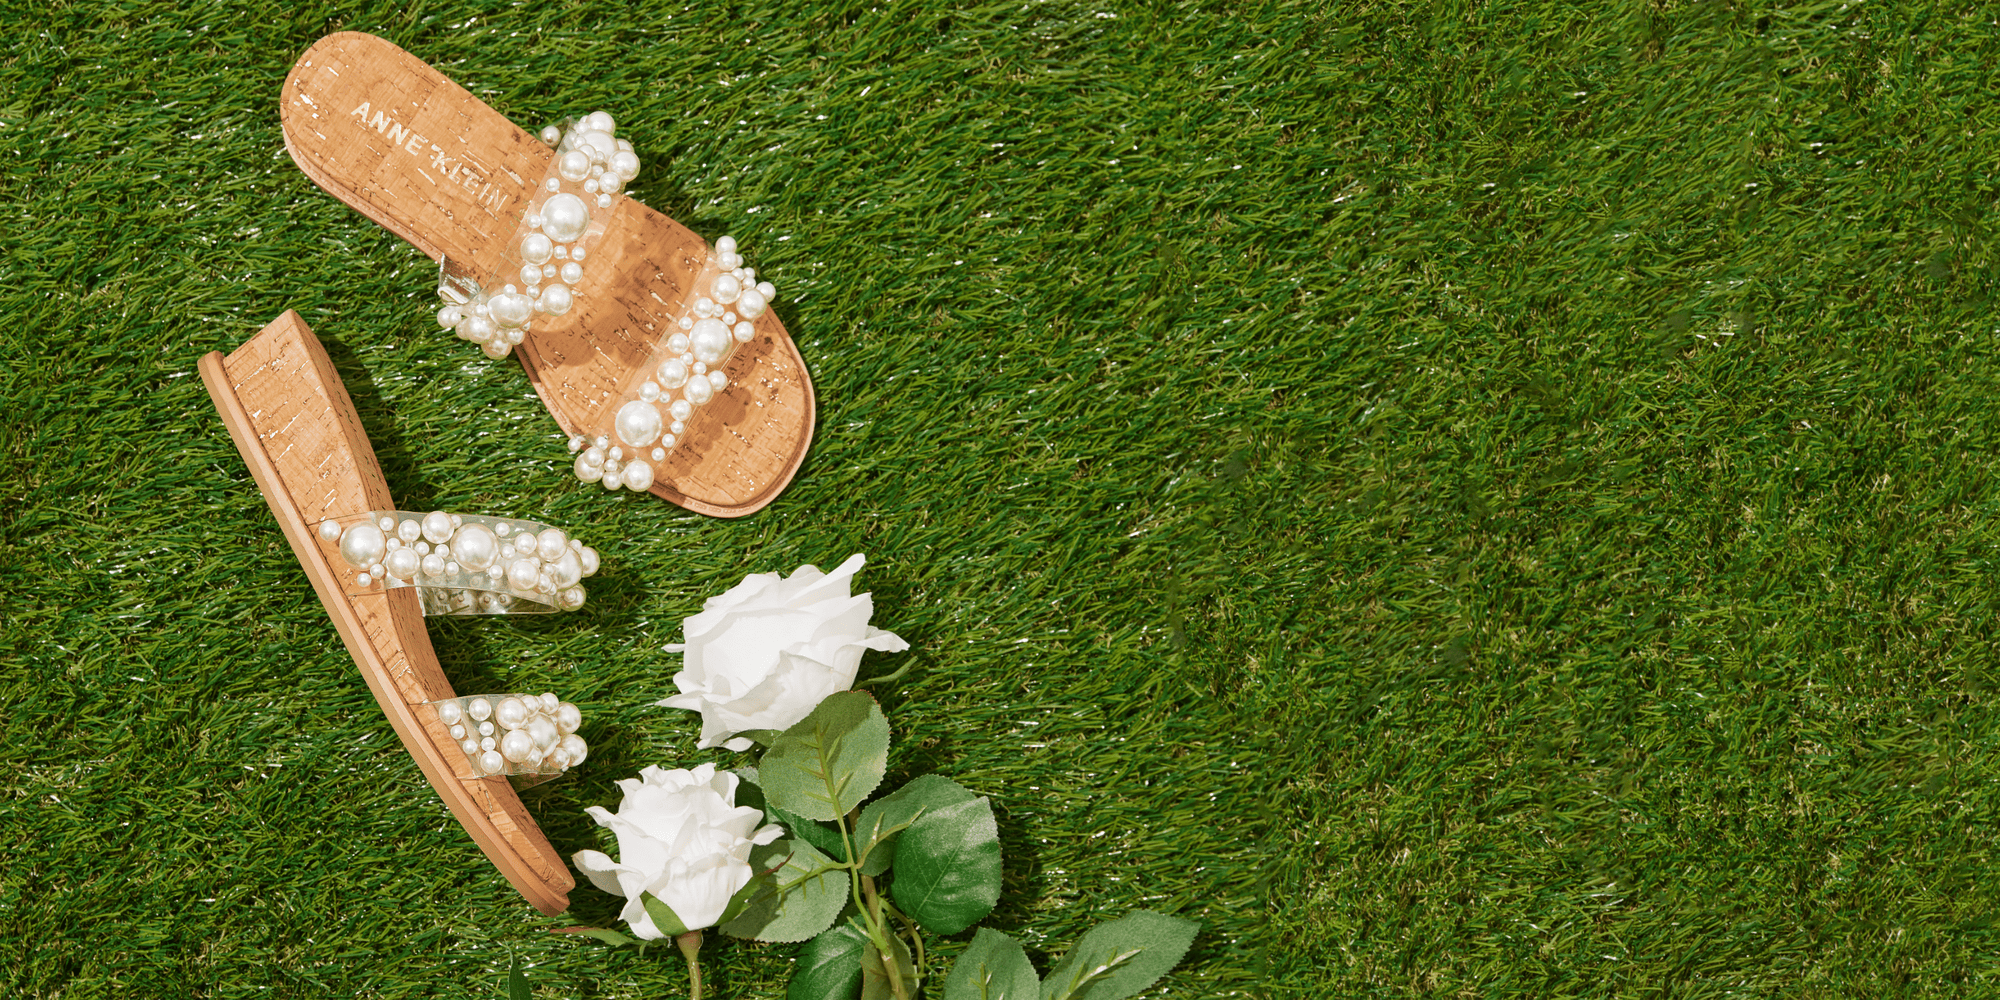 Summer Sandals For Every Occasion - Our Picks